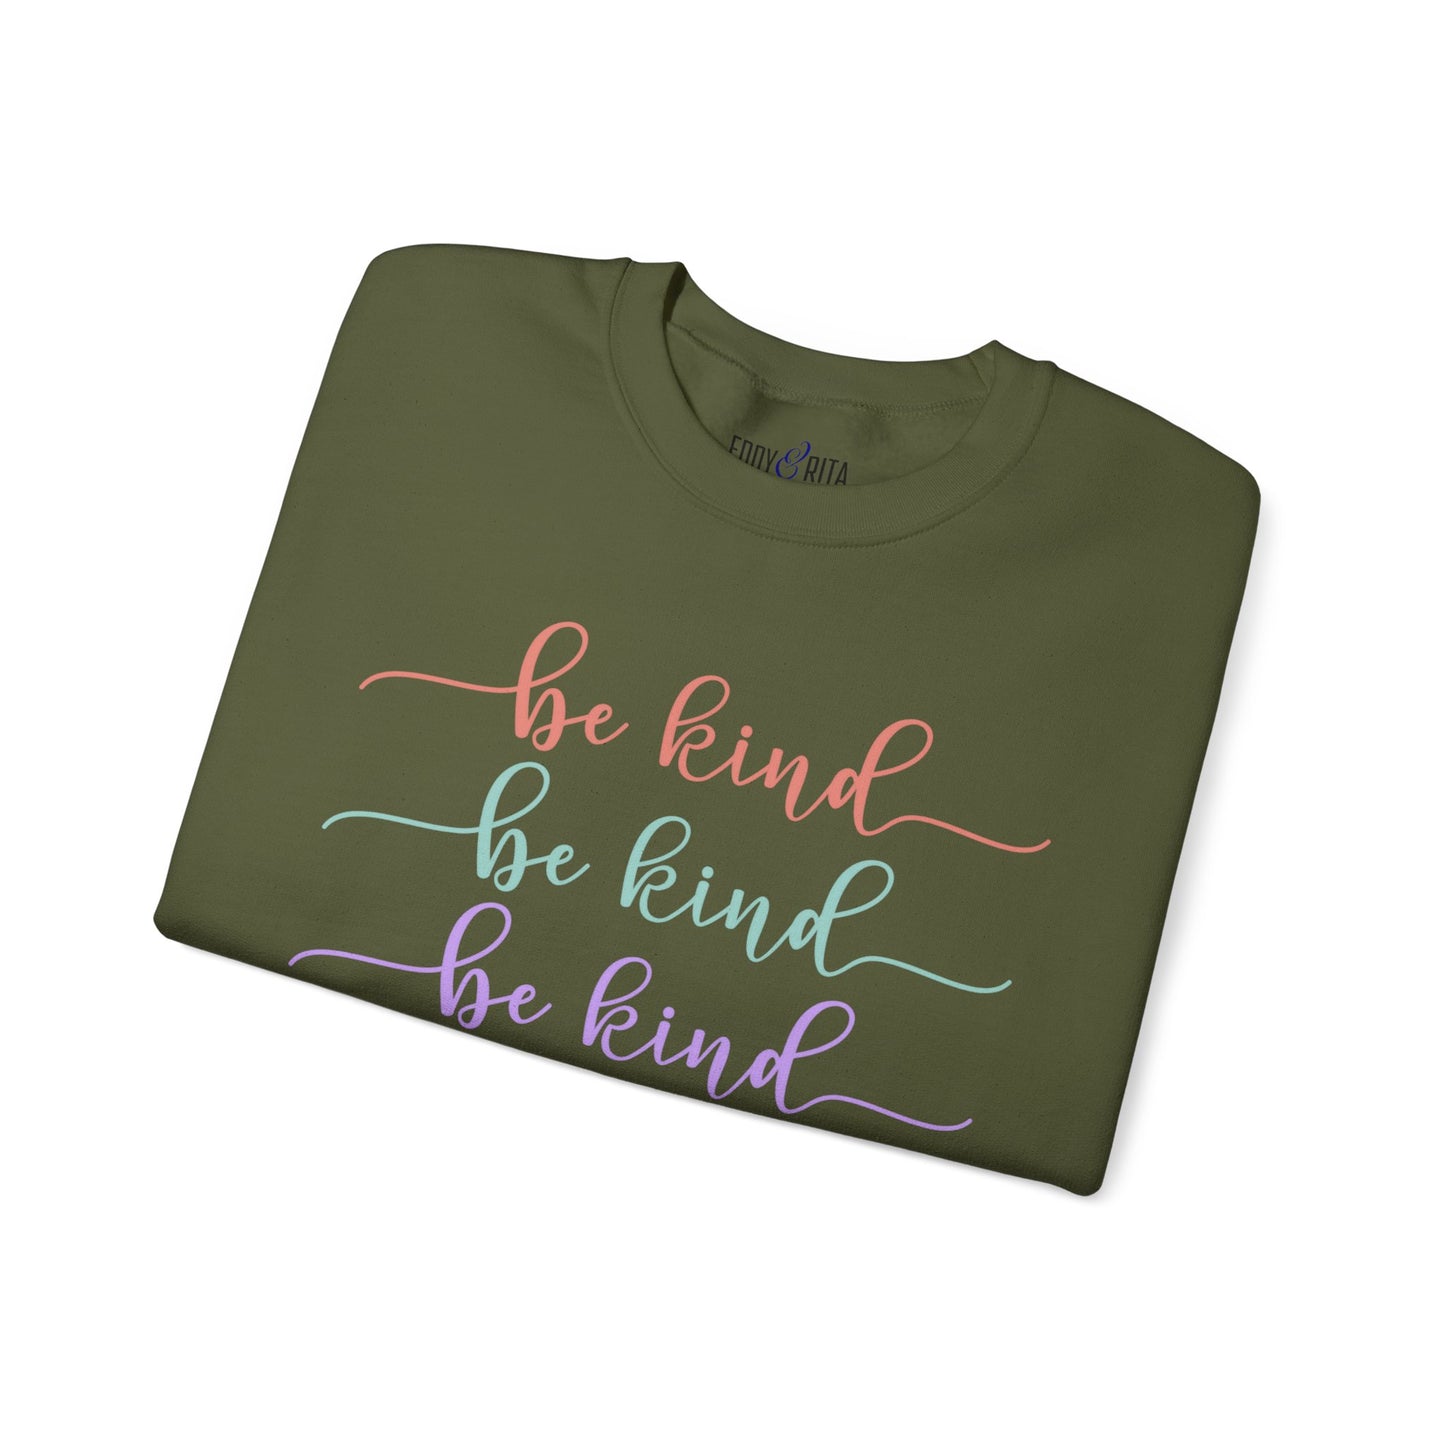 Be Kind: Women's Comfort Sweatshirt for Positive Vibes and Stylish Warmth - Eddy and RitaBe Kind: Women's Comfort Sweatshirt for Positive Vibes and Stylish Warmth - Eddy and Rita